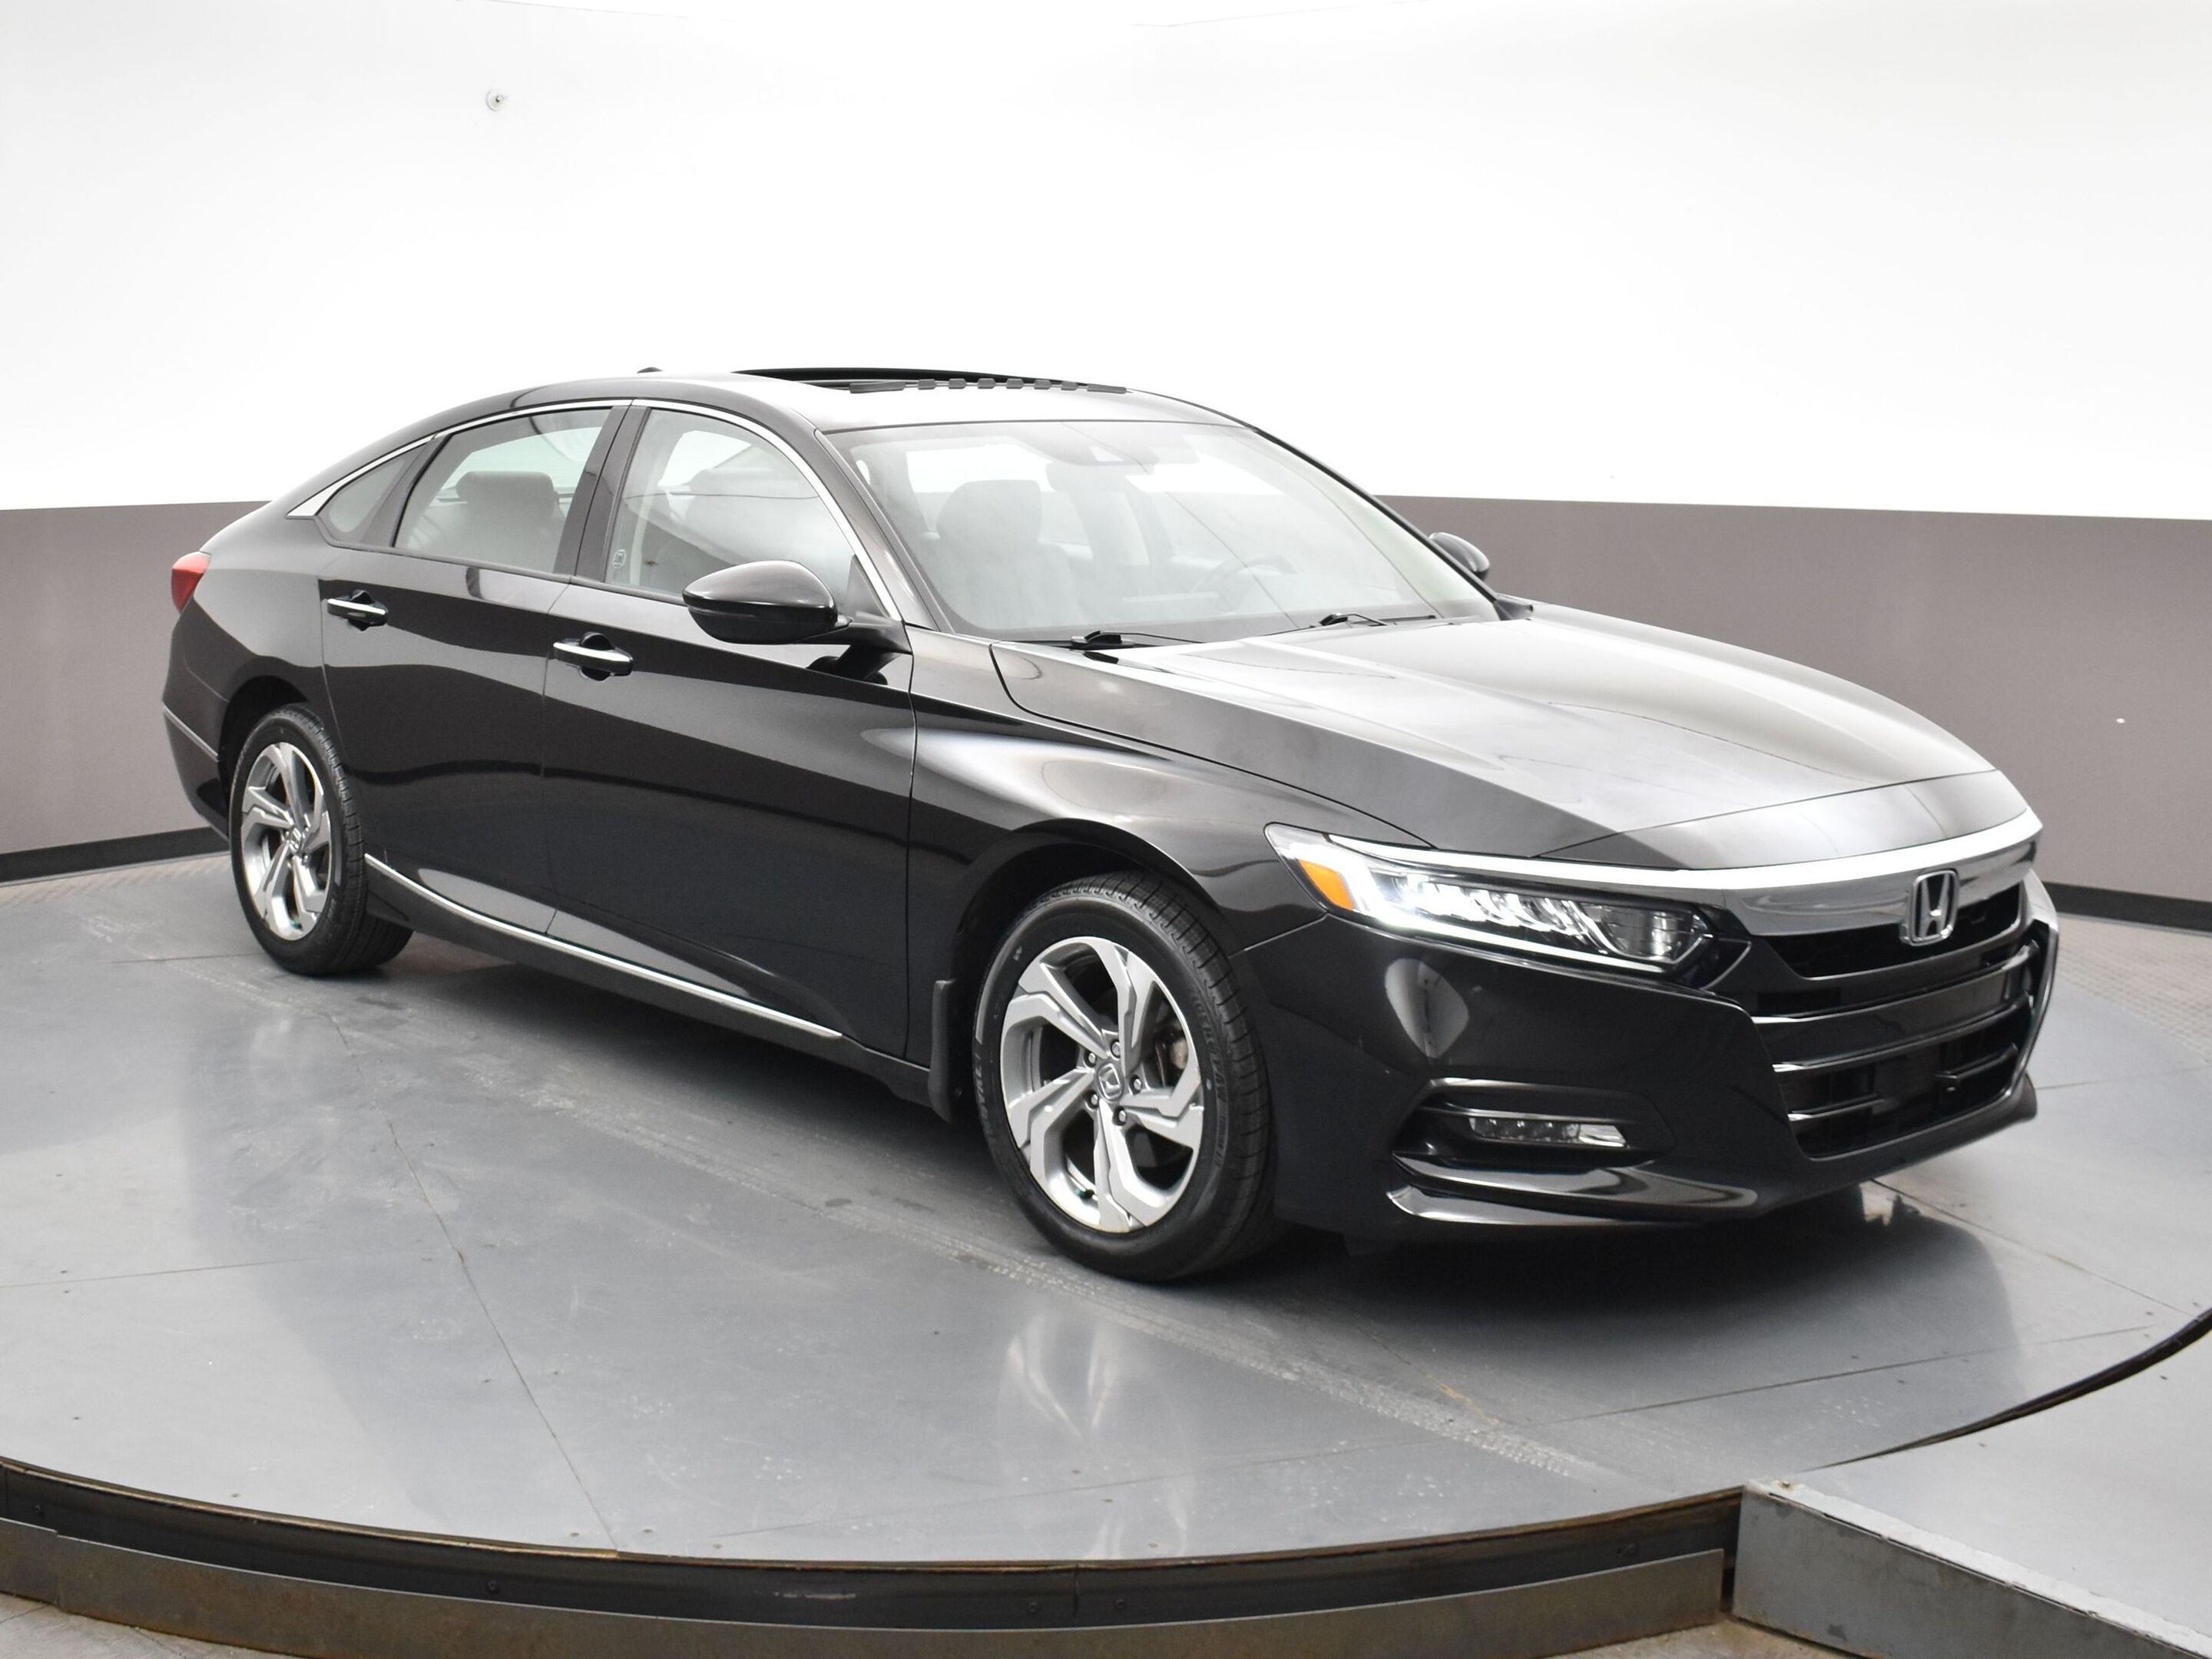 2019 Honda Accord EX-L BOOK YOUR TEST DRIVE TODAY! 902-464-9550